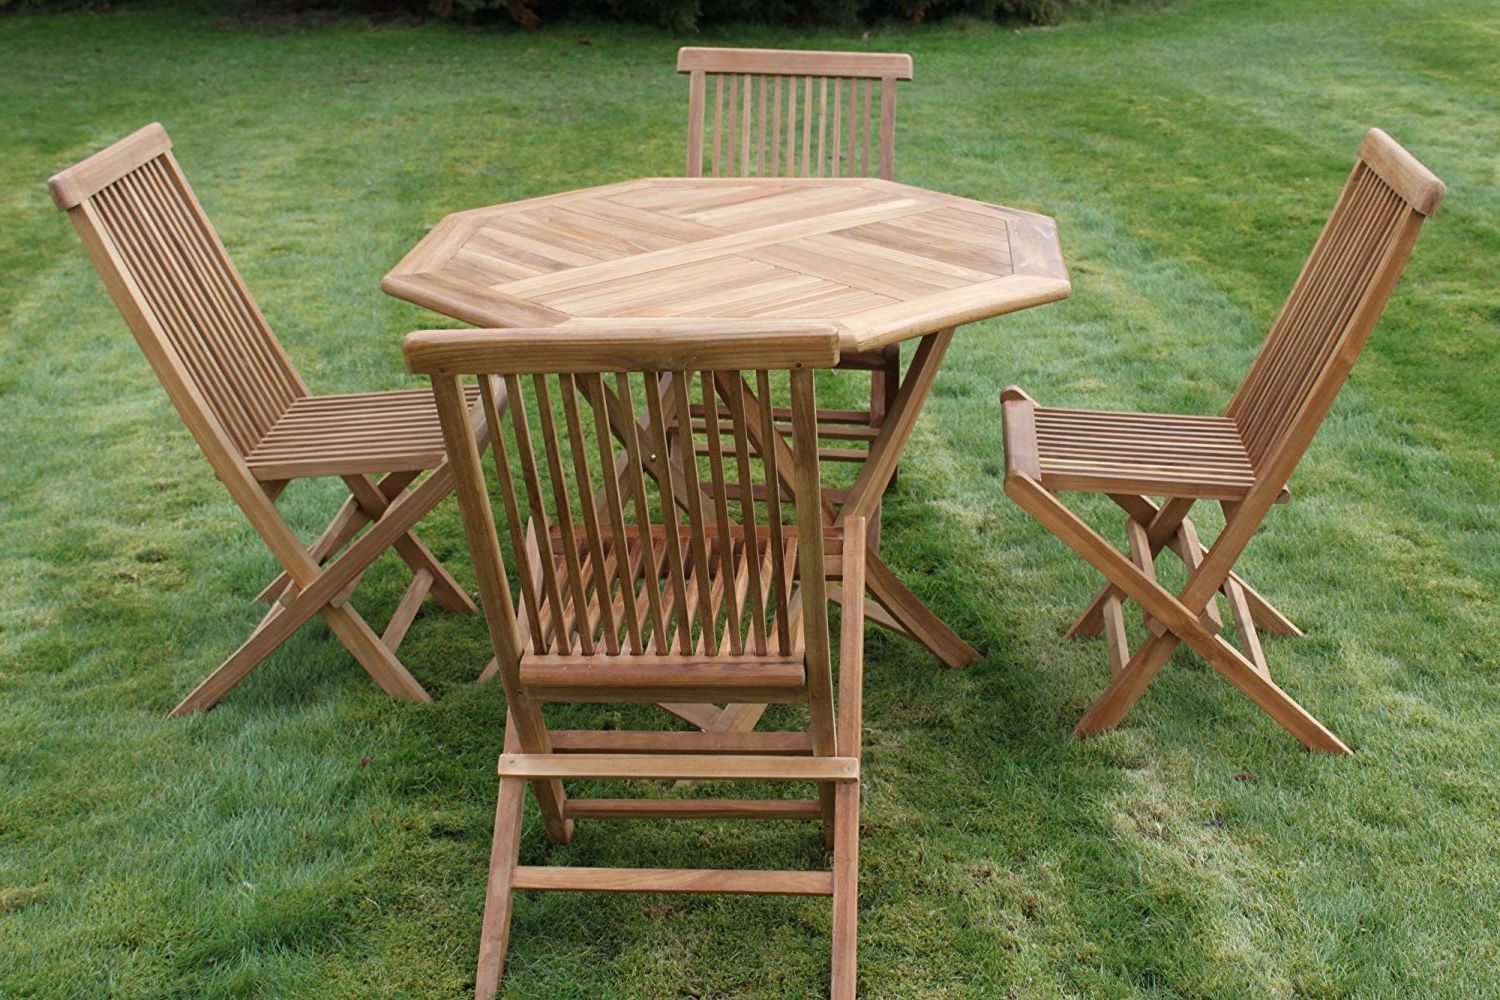 Preferred Solid Teak Octagonal Garden Dining Table And 4 Folding Chairs – Garden Inside Teak Folding Chair Patio Dining Sets (View 2 of 15)